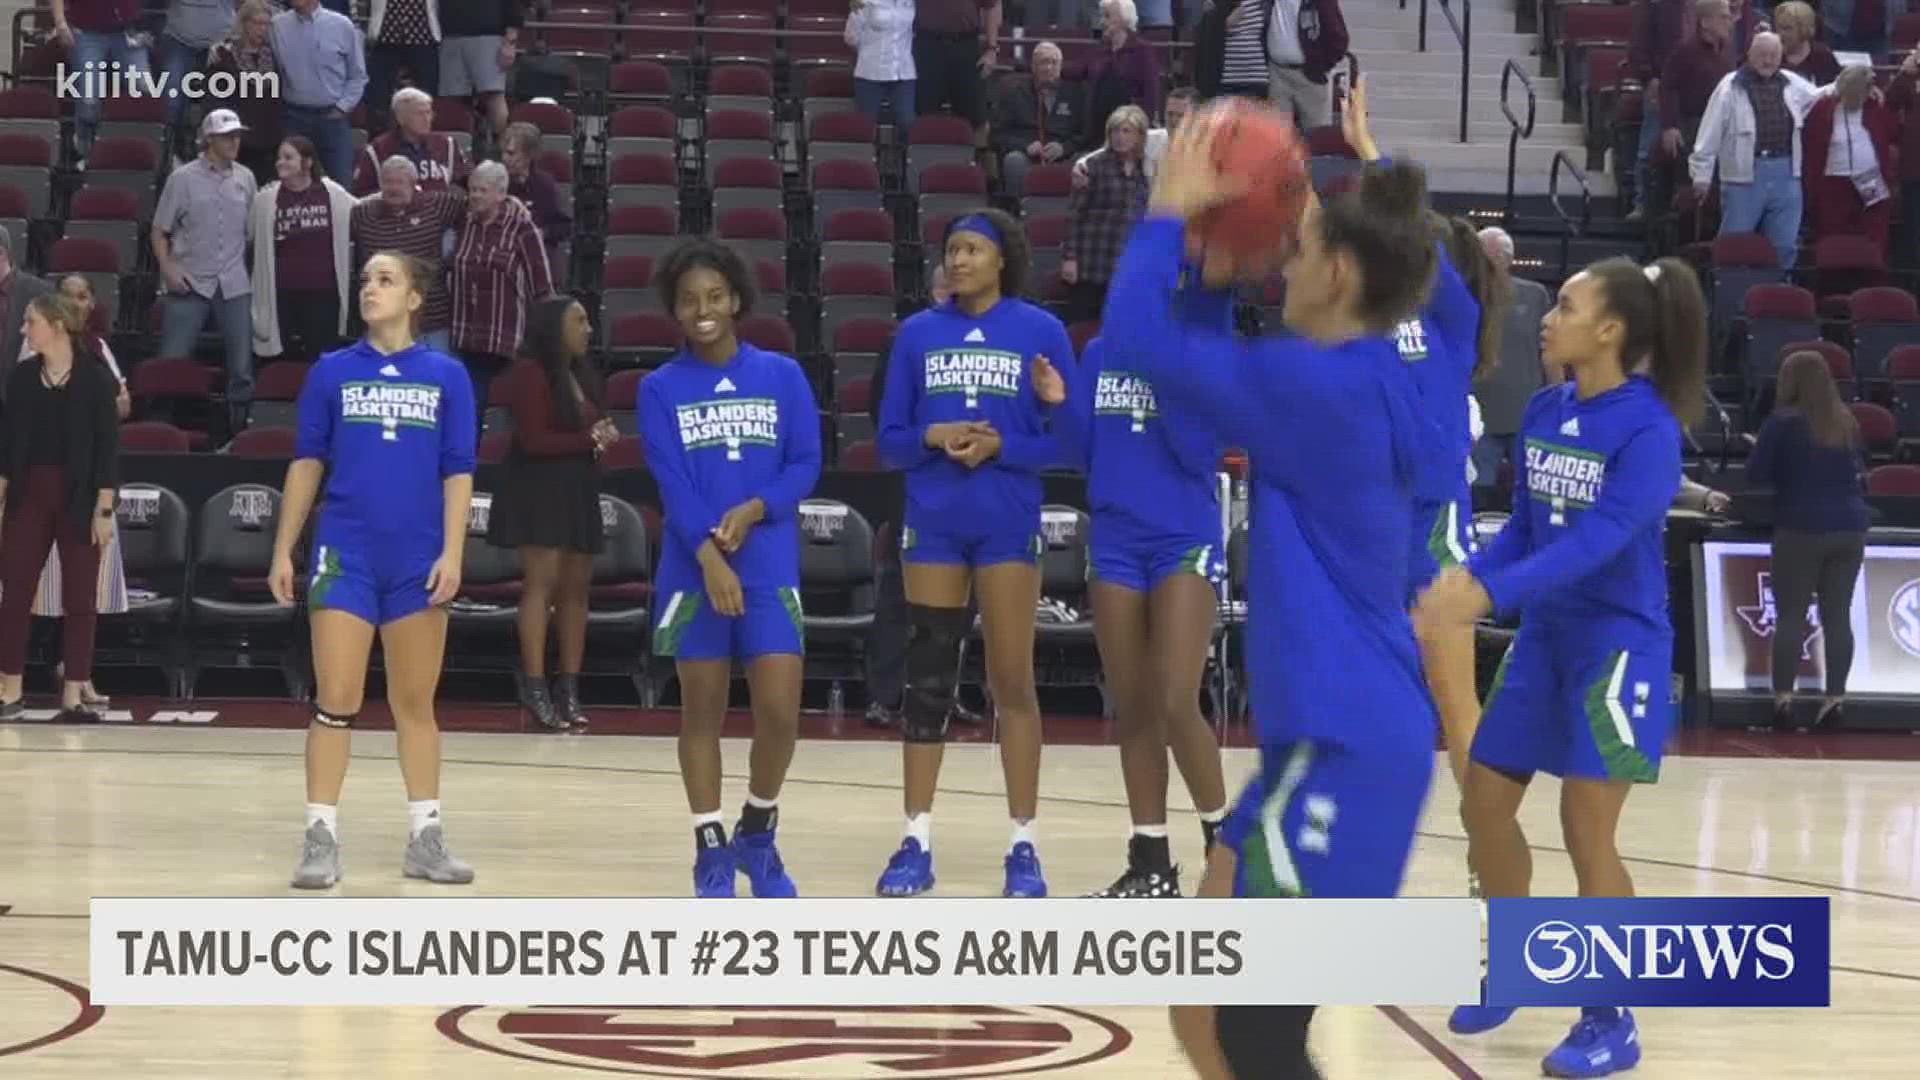 The Aggies knocked off the Islanders 87-54 in the season opener up in College Station. Highlights courtesy KAGS-TV.